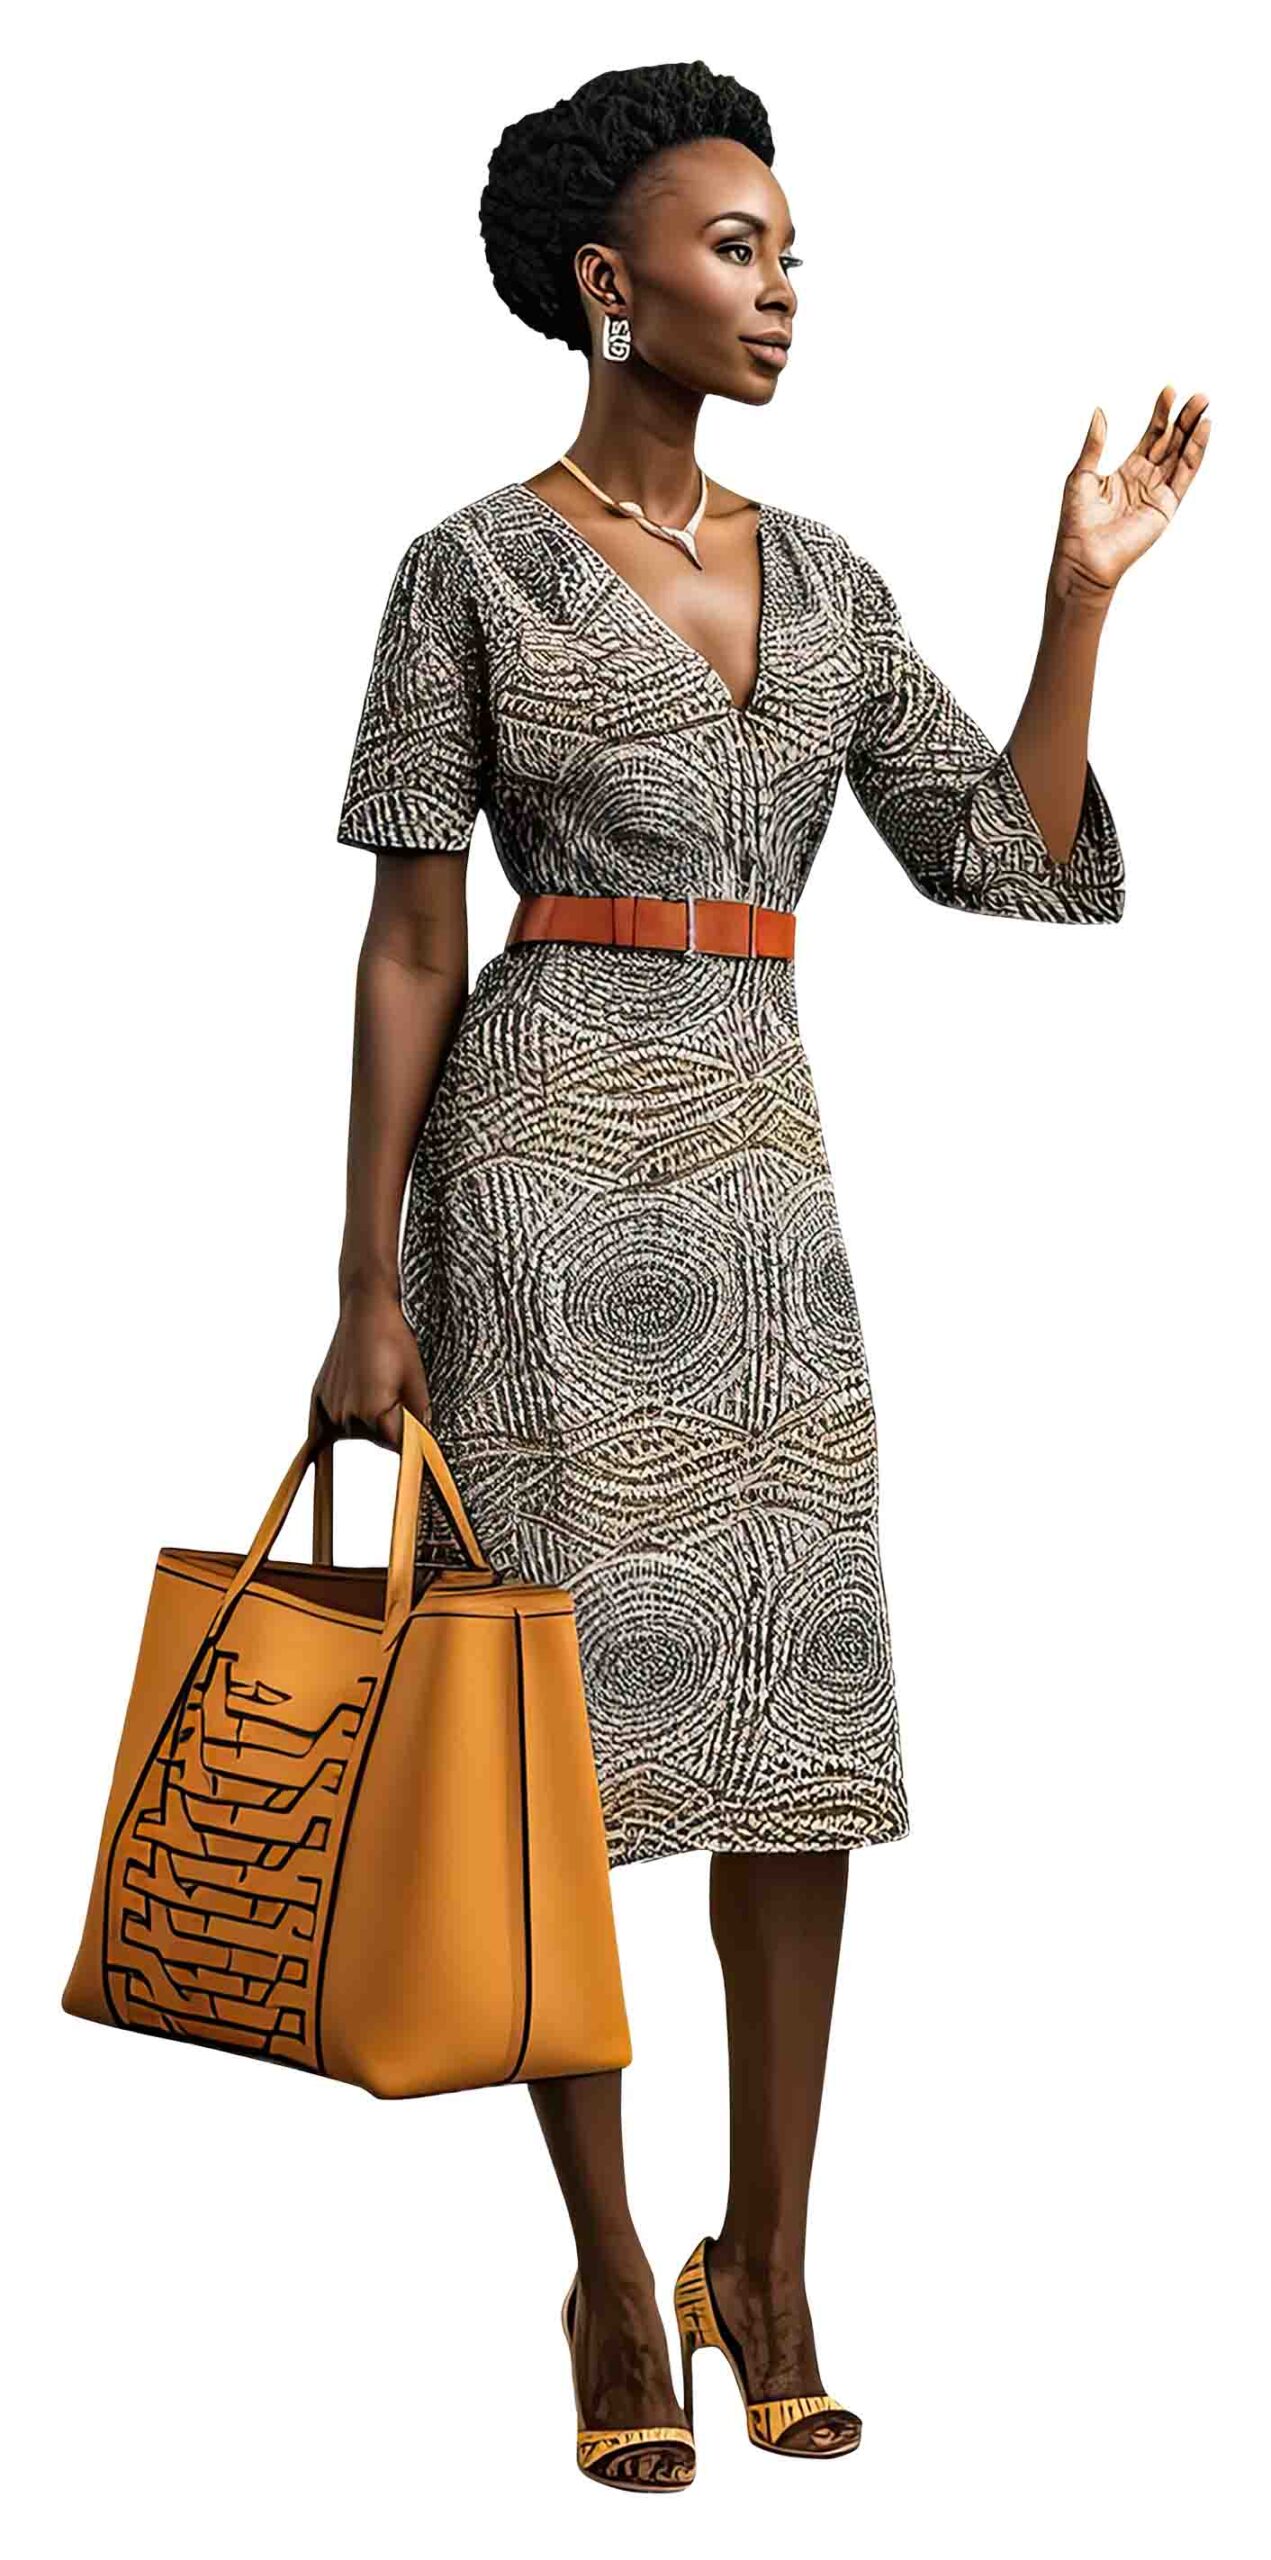 African woman cutout Holding bag